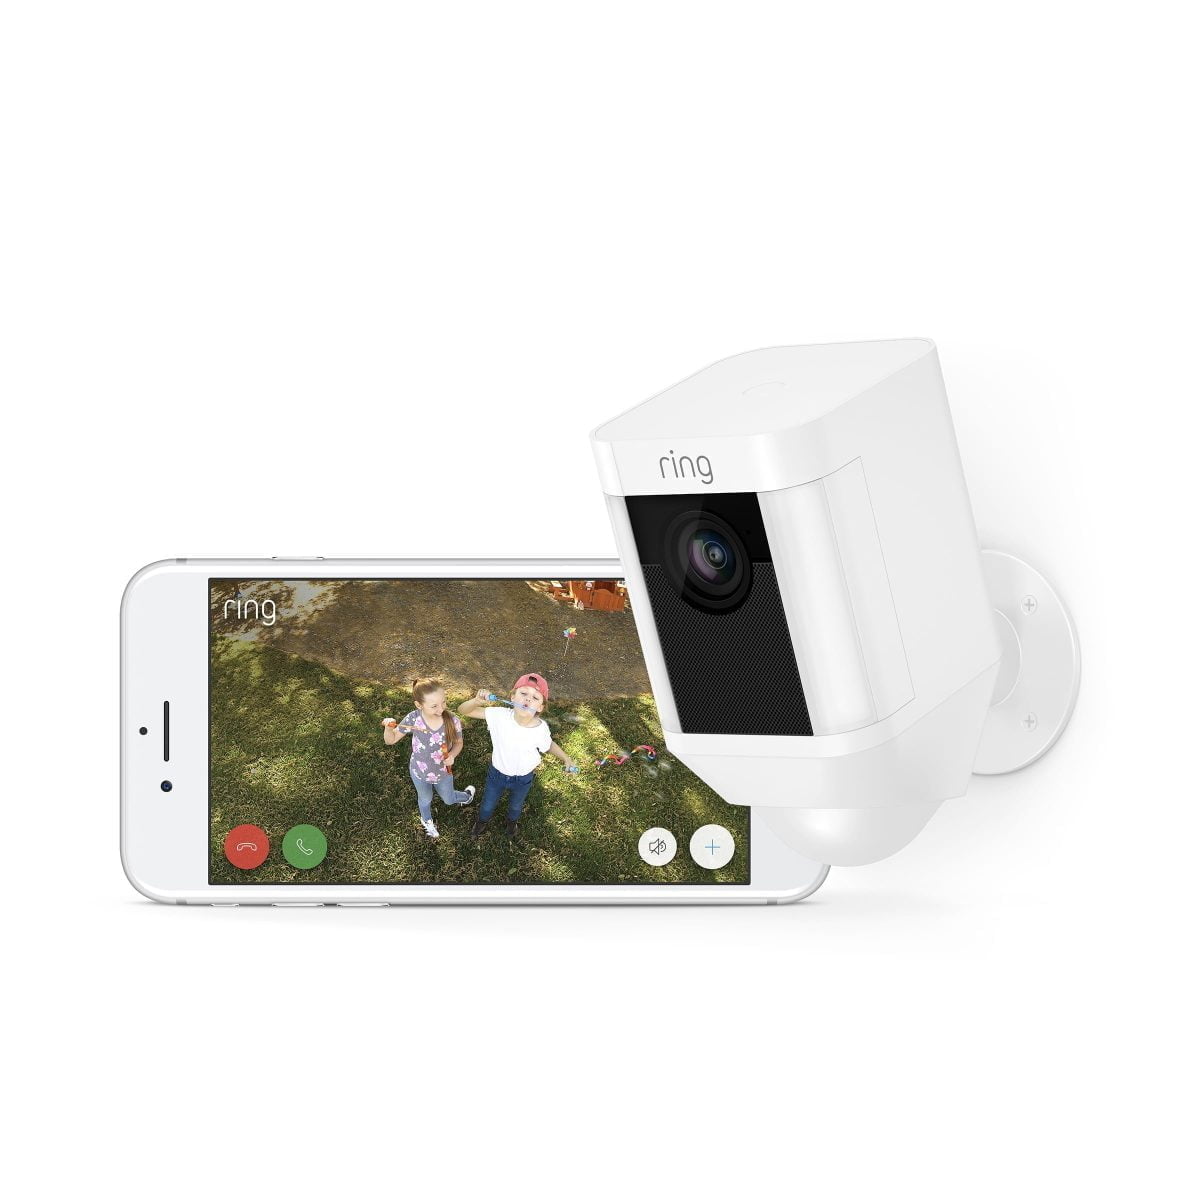 Ring Spotlight Cam Battery White Product Lifestyle Ring &Lt;H1&Gt;Ring Spotlight Cam Battery - White&Lt;/H1&Gt; Https://Www.youtube.com/Watch?V=Yrbc1Pwuasg &Lt;Ul&Gt; &Lt;Li&Gt;See, Hear And Speak To People On Your Property From Your Phone, Tablet And Pc&Lt;/Li&Gt; &Lt;Li&Gt;Shine The Lights And Start Recording Video As Soon As Motion Is Detected&Lt;/Li&Gt; &Lt;Li&Gt;Sound The 110-Decibel Siren On Suspicious Activity. Connectivity-802.11 B G N Wi-Fi Connection At 2.4Ghz&Lt;/Li&Gt; &Lt;Li&Gt;Includes All The Tools You Need To Get Your Cam Setup In Just A Few Minutes&Lt;/Li&Gt; &Lt;Li&Gt;Battery-Powered Hd Camera With Two-Way Talk And Spotlights, For Security Anywhere You Need It&Lt;/Li&Gt; &Lt;/Ul&Gt; &Lt;Pre&Gt;&Lt;Strong&Gt;&Lt;Span Class=&Quot;A-List-Item&Quot;&Gt;One Year Warranty &Lt;B&Gt;We Also Provide International Wholesale And Retail Shipping To All Gcc Countries: Saudi Arabia, Qatar, Oman, Kuwait, Bahrain.&Lt;/B&Gt;&Lt;/Span&Gt;&Lt;/Strong&Gt;&Lt;/Pre&Gt; Ring Spotlight Cam Battery Ring Spotlight Cam Battery - White